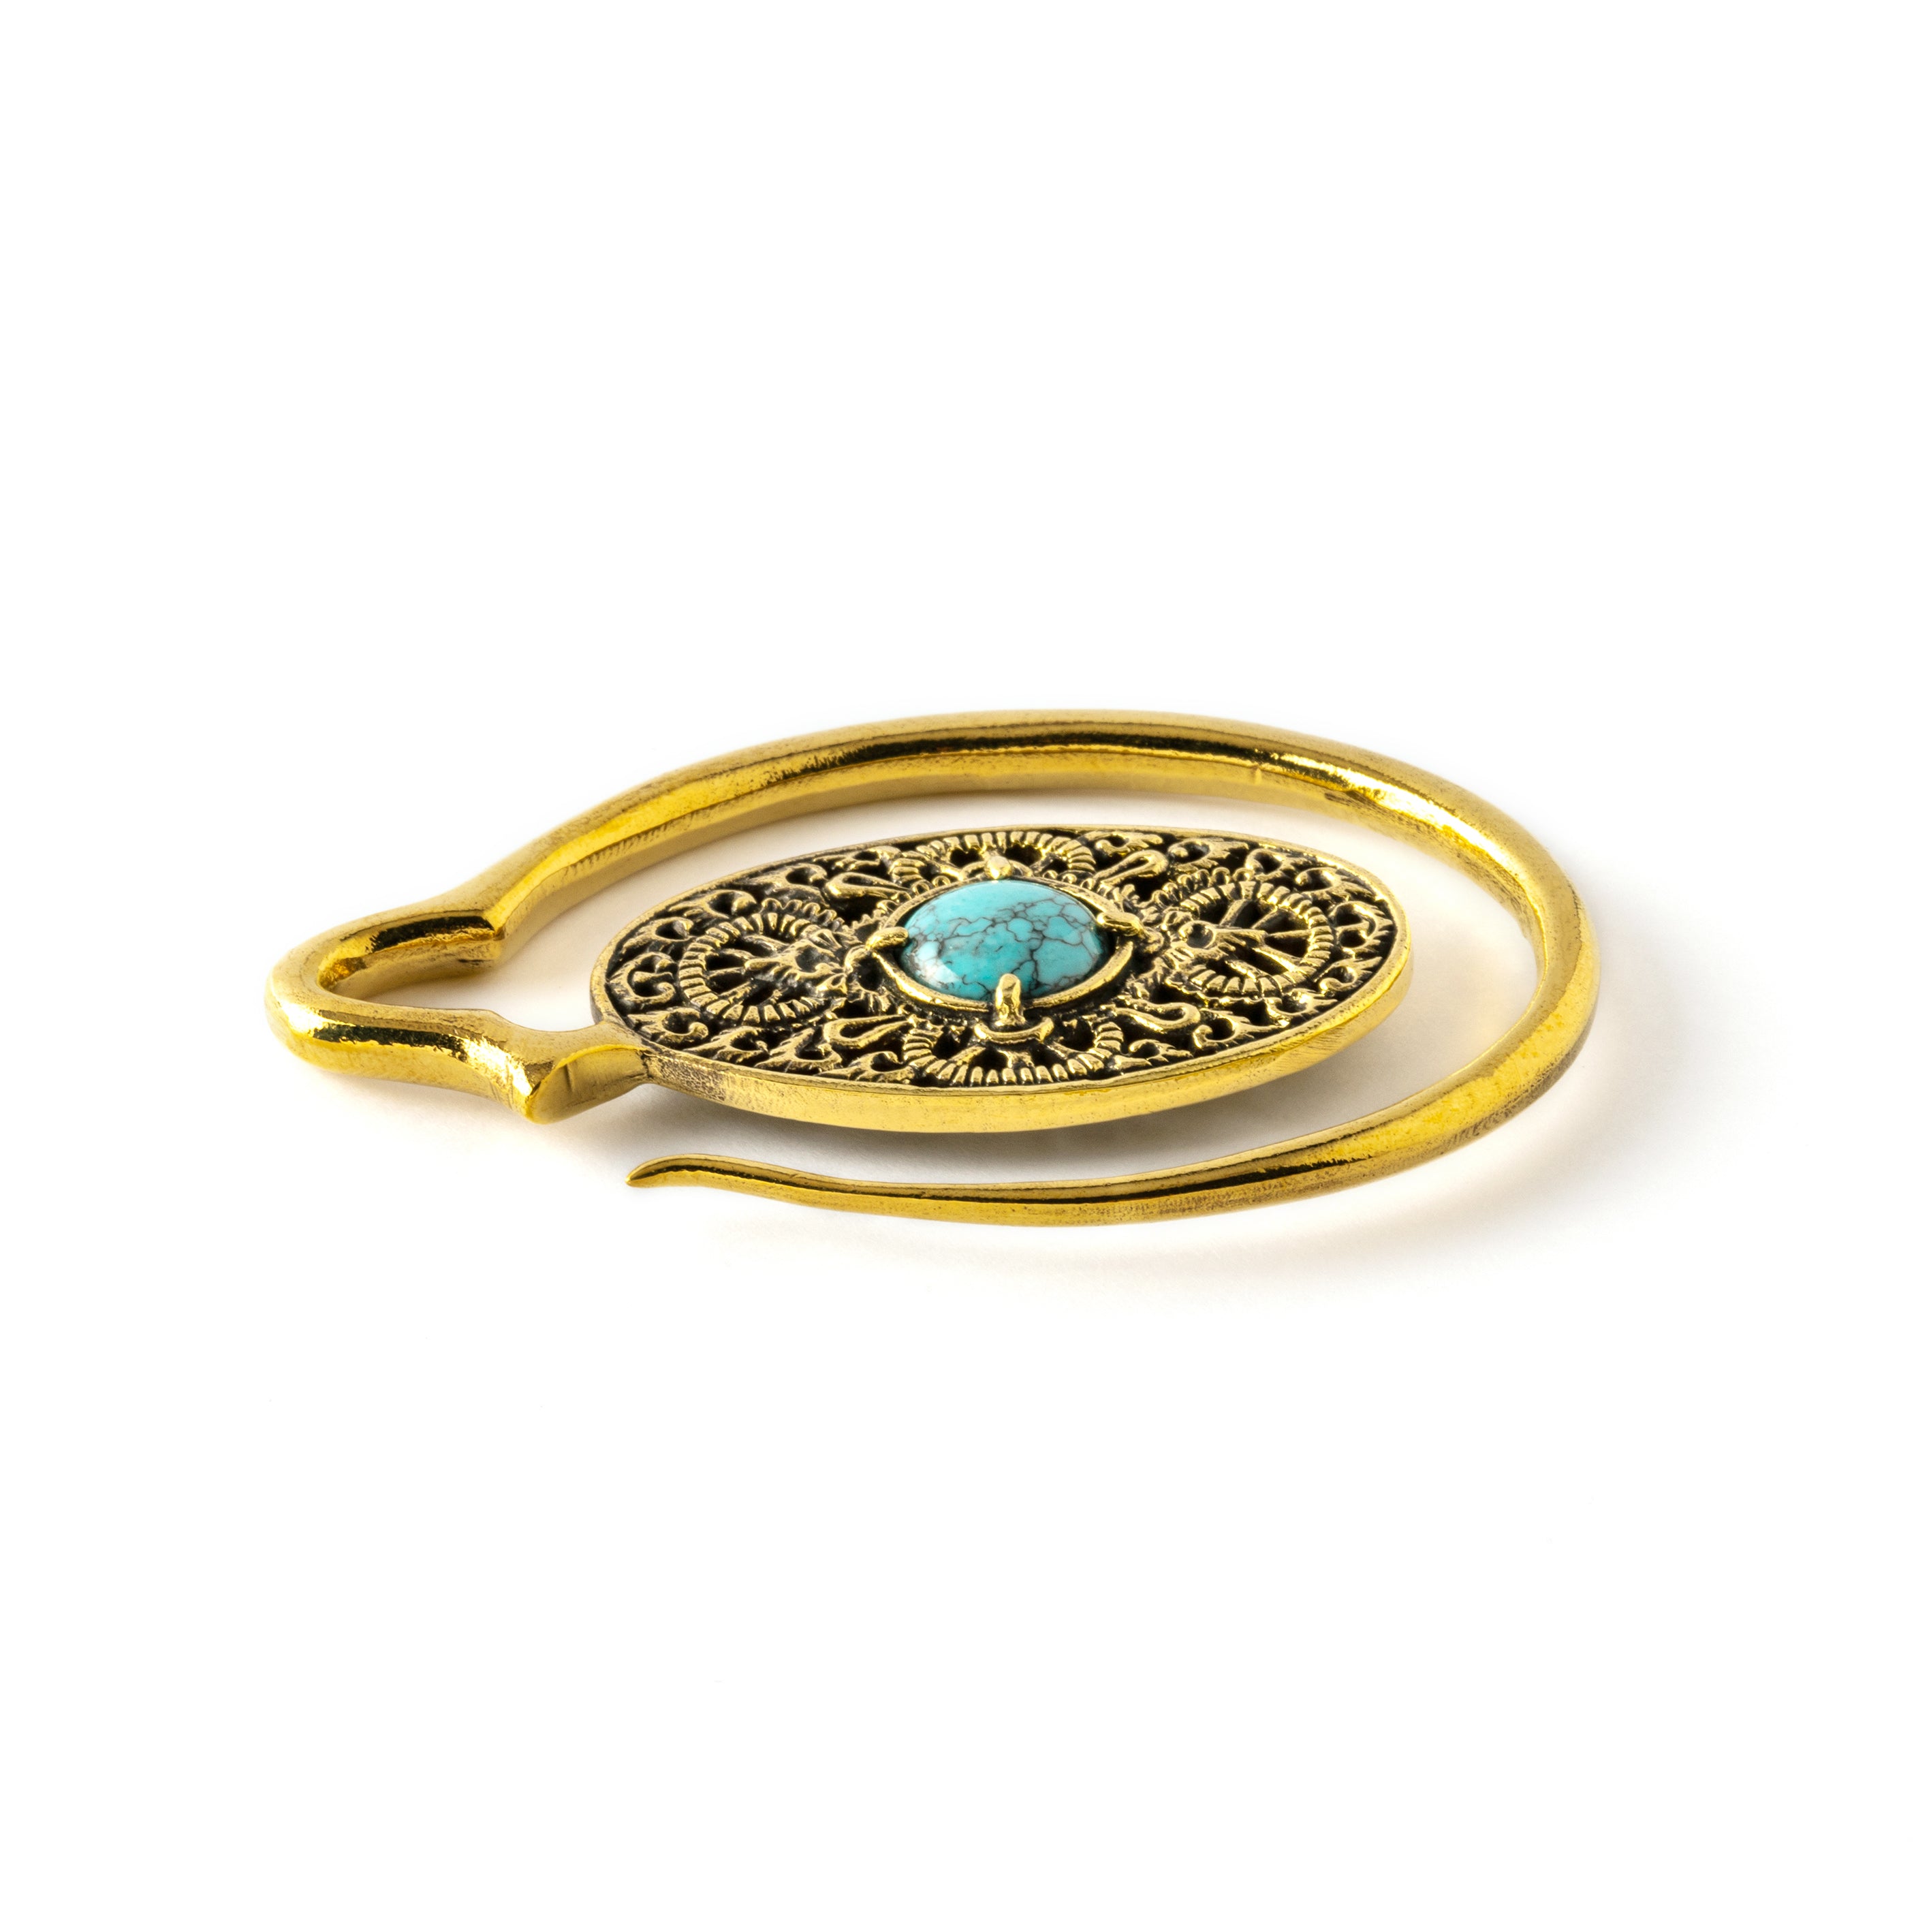 golden large ear weights hangers oval shaped with intricate filigree pattern and turquoise down view